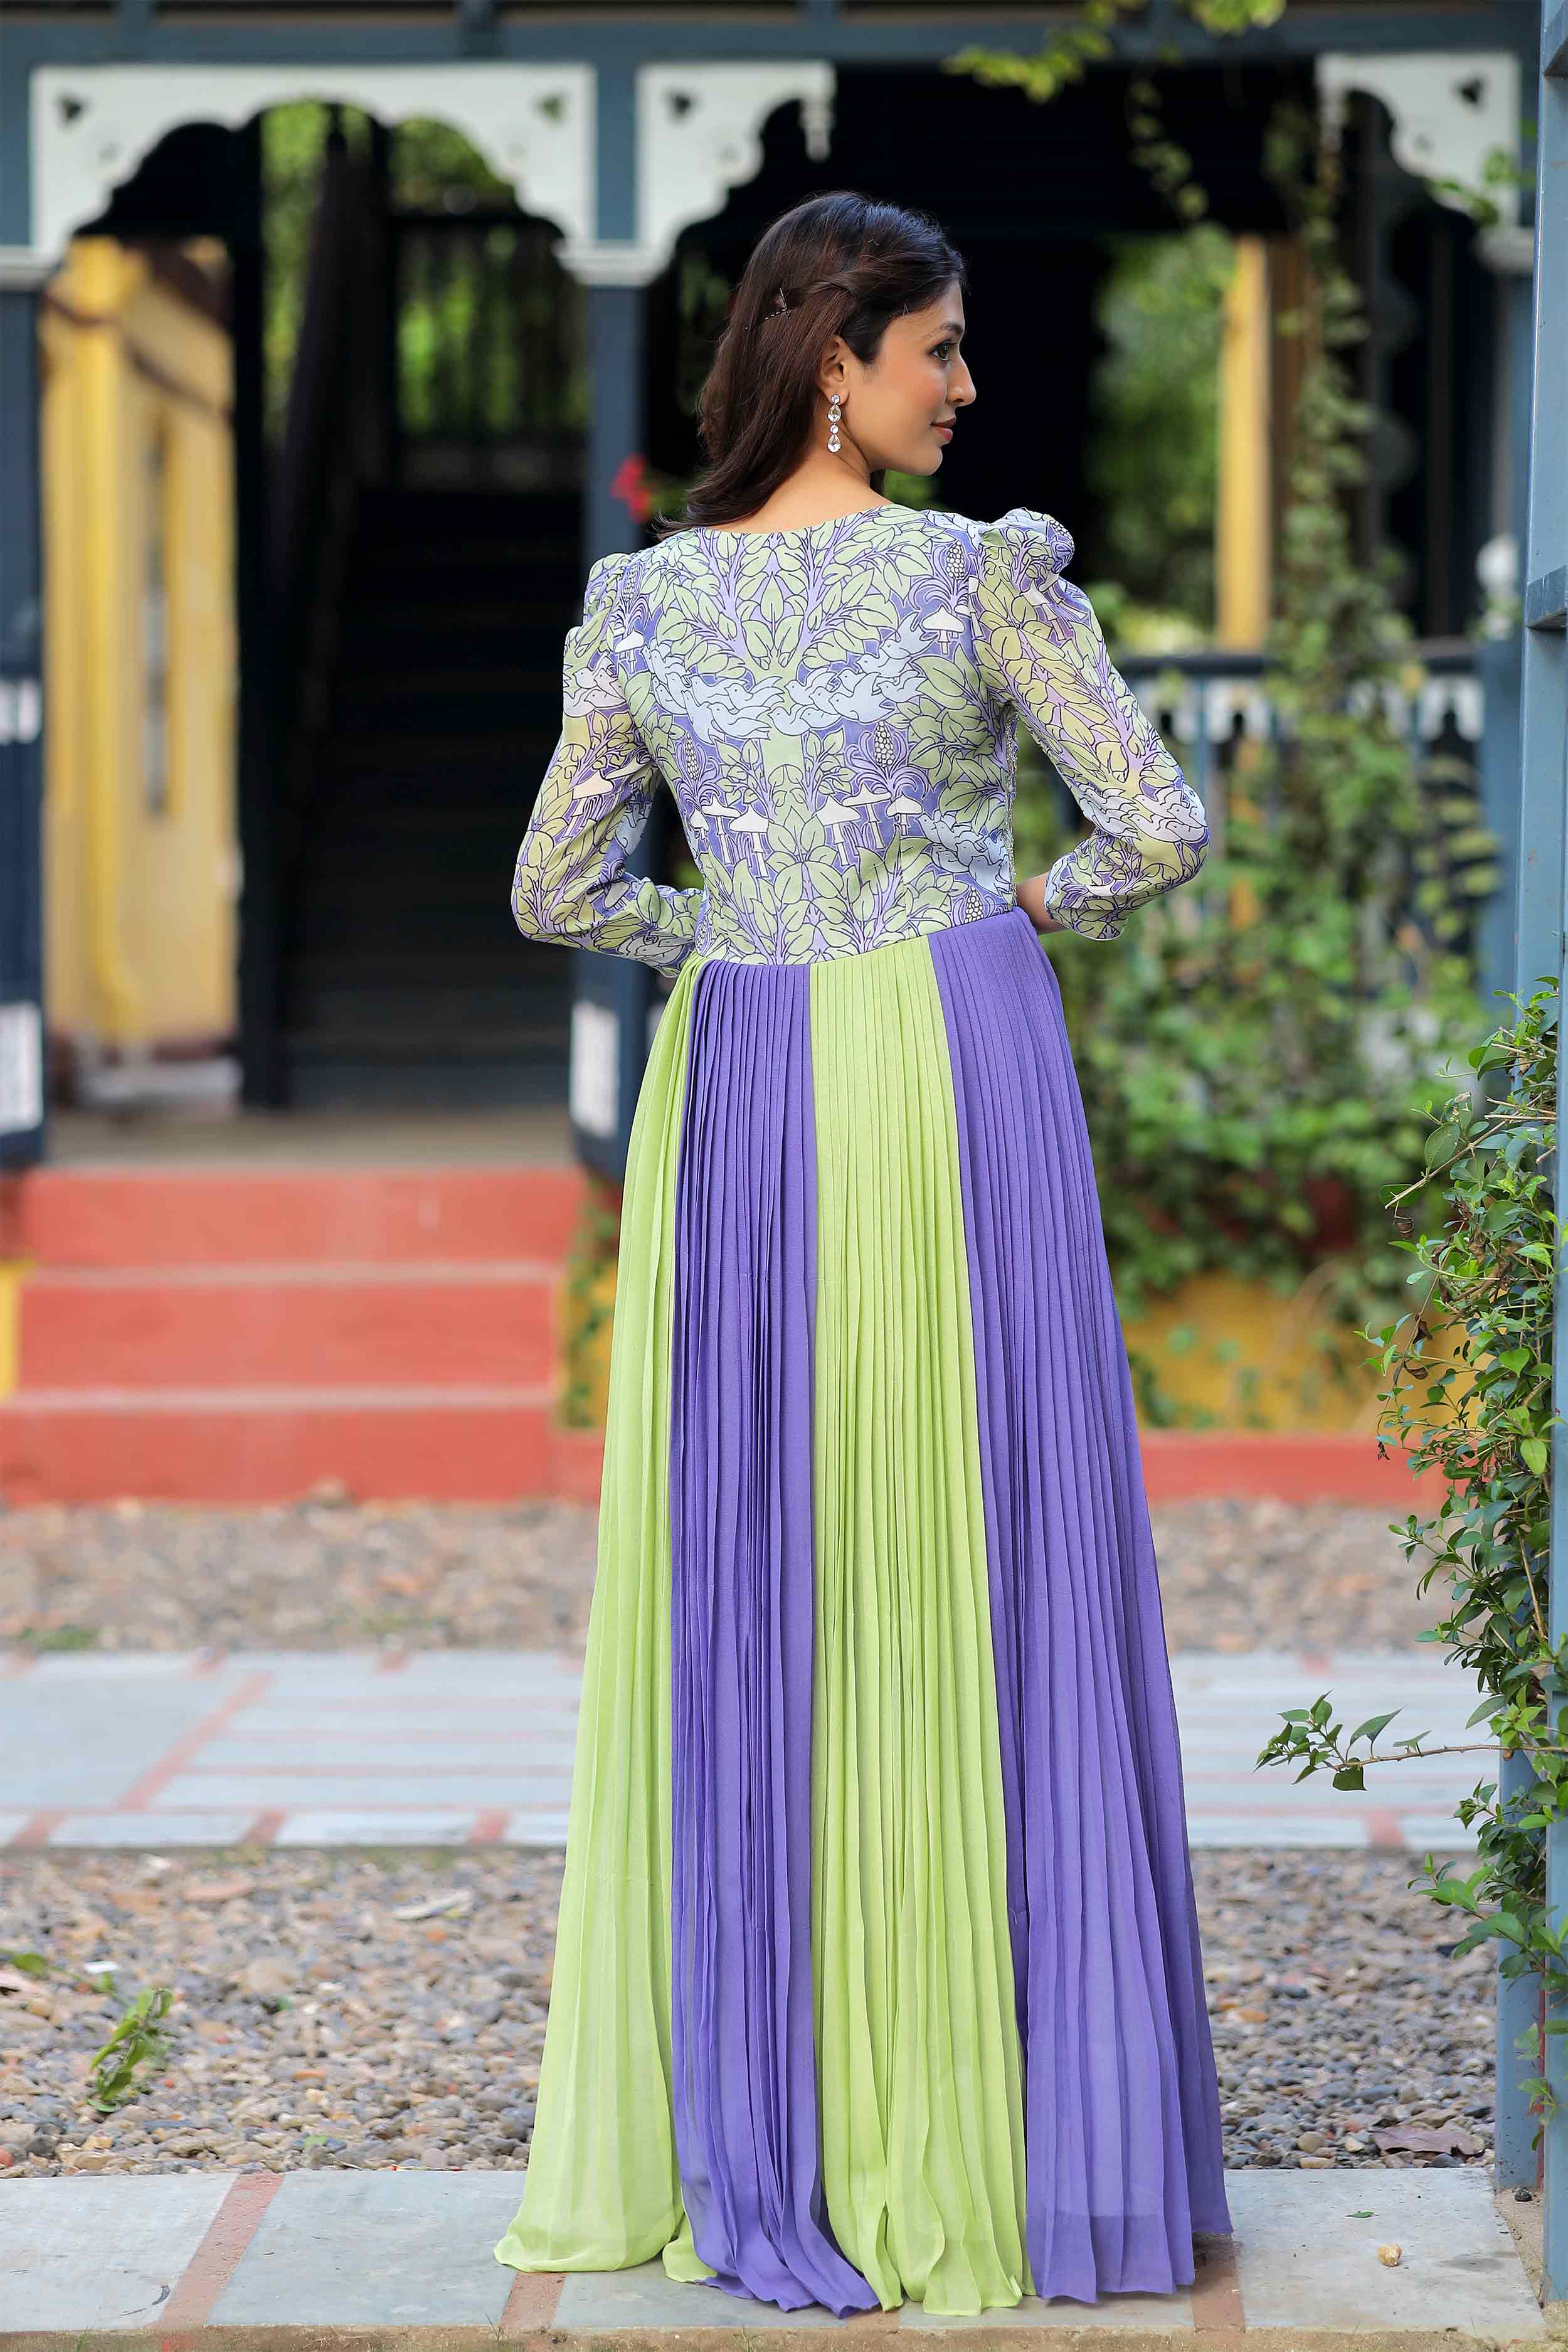 a woman in violet long dress